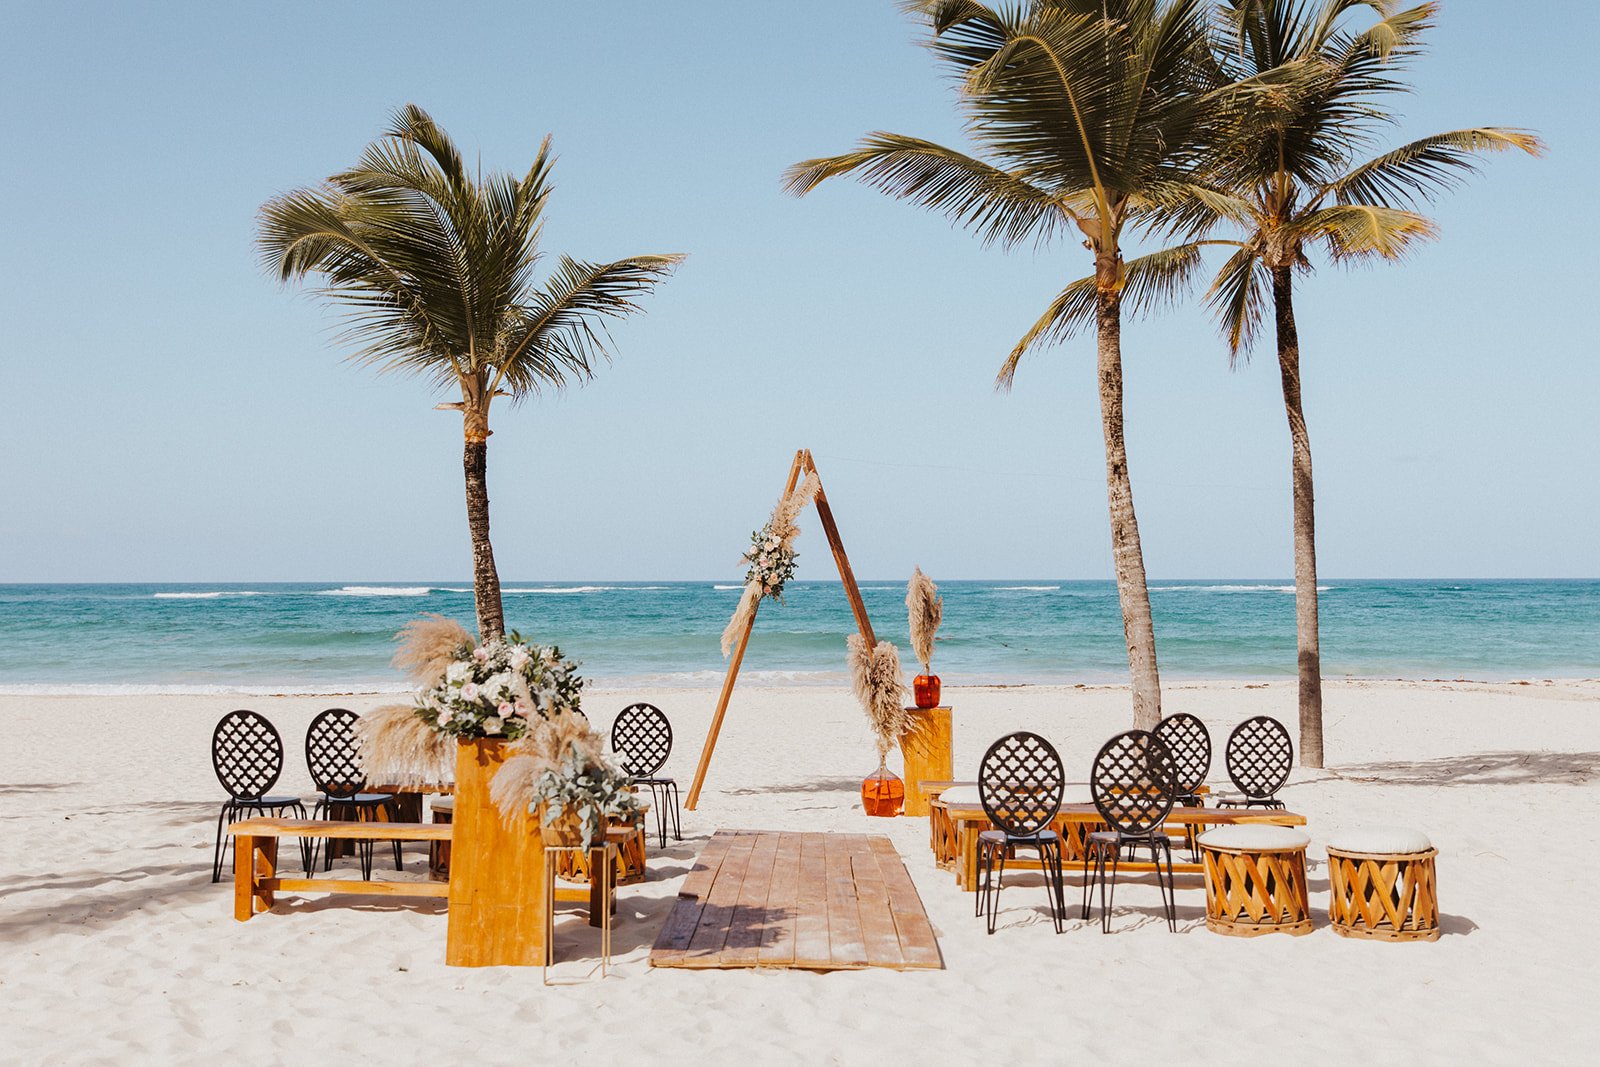  A beach destination wedding ceremony setup with a lovely boho arbor with pampas grass and florals under palm trees with the ocean in the background 